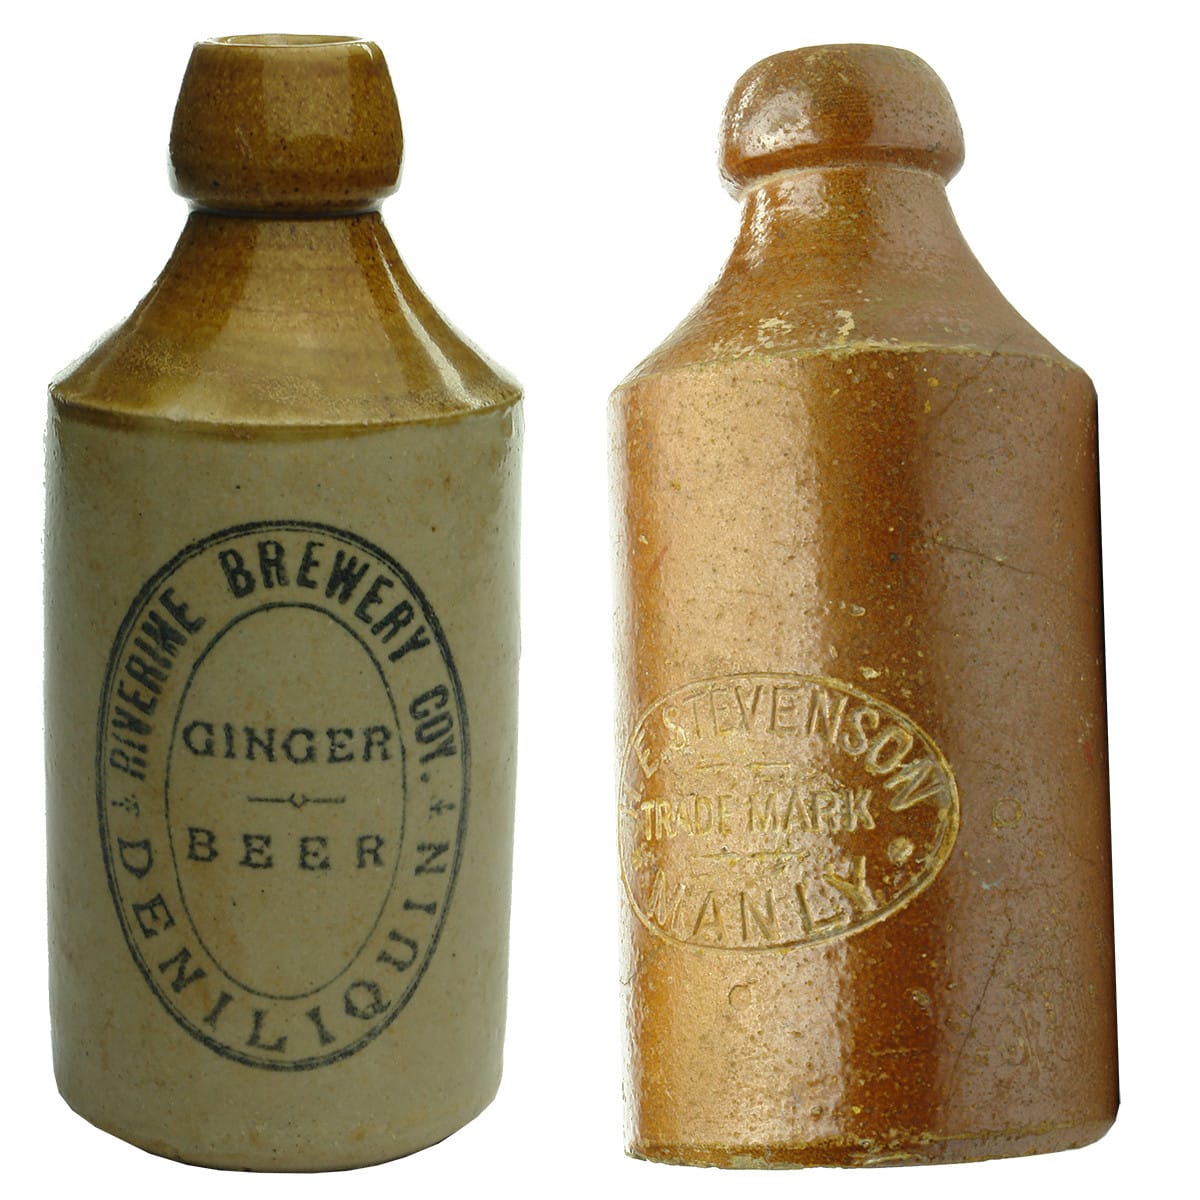 2 Ginger Beers: Riverine Brewery Co., Deniliquin; H. E. Stevenson, Manly. (New South Wales)